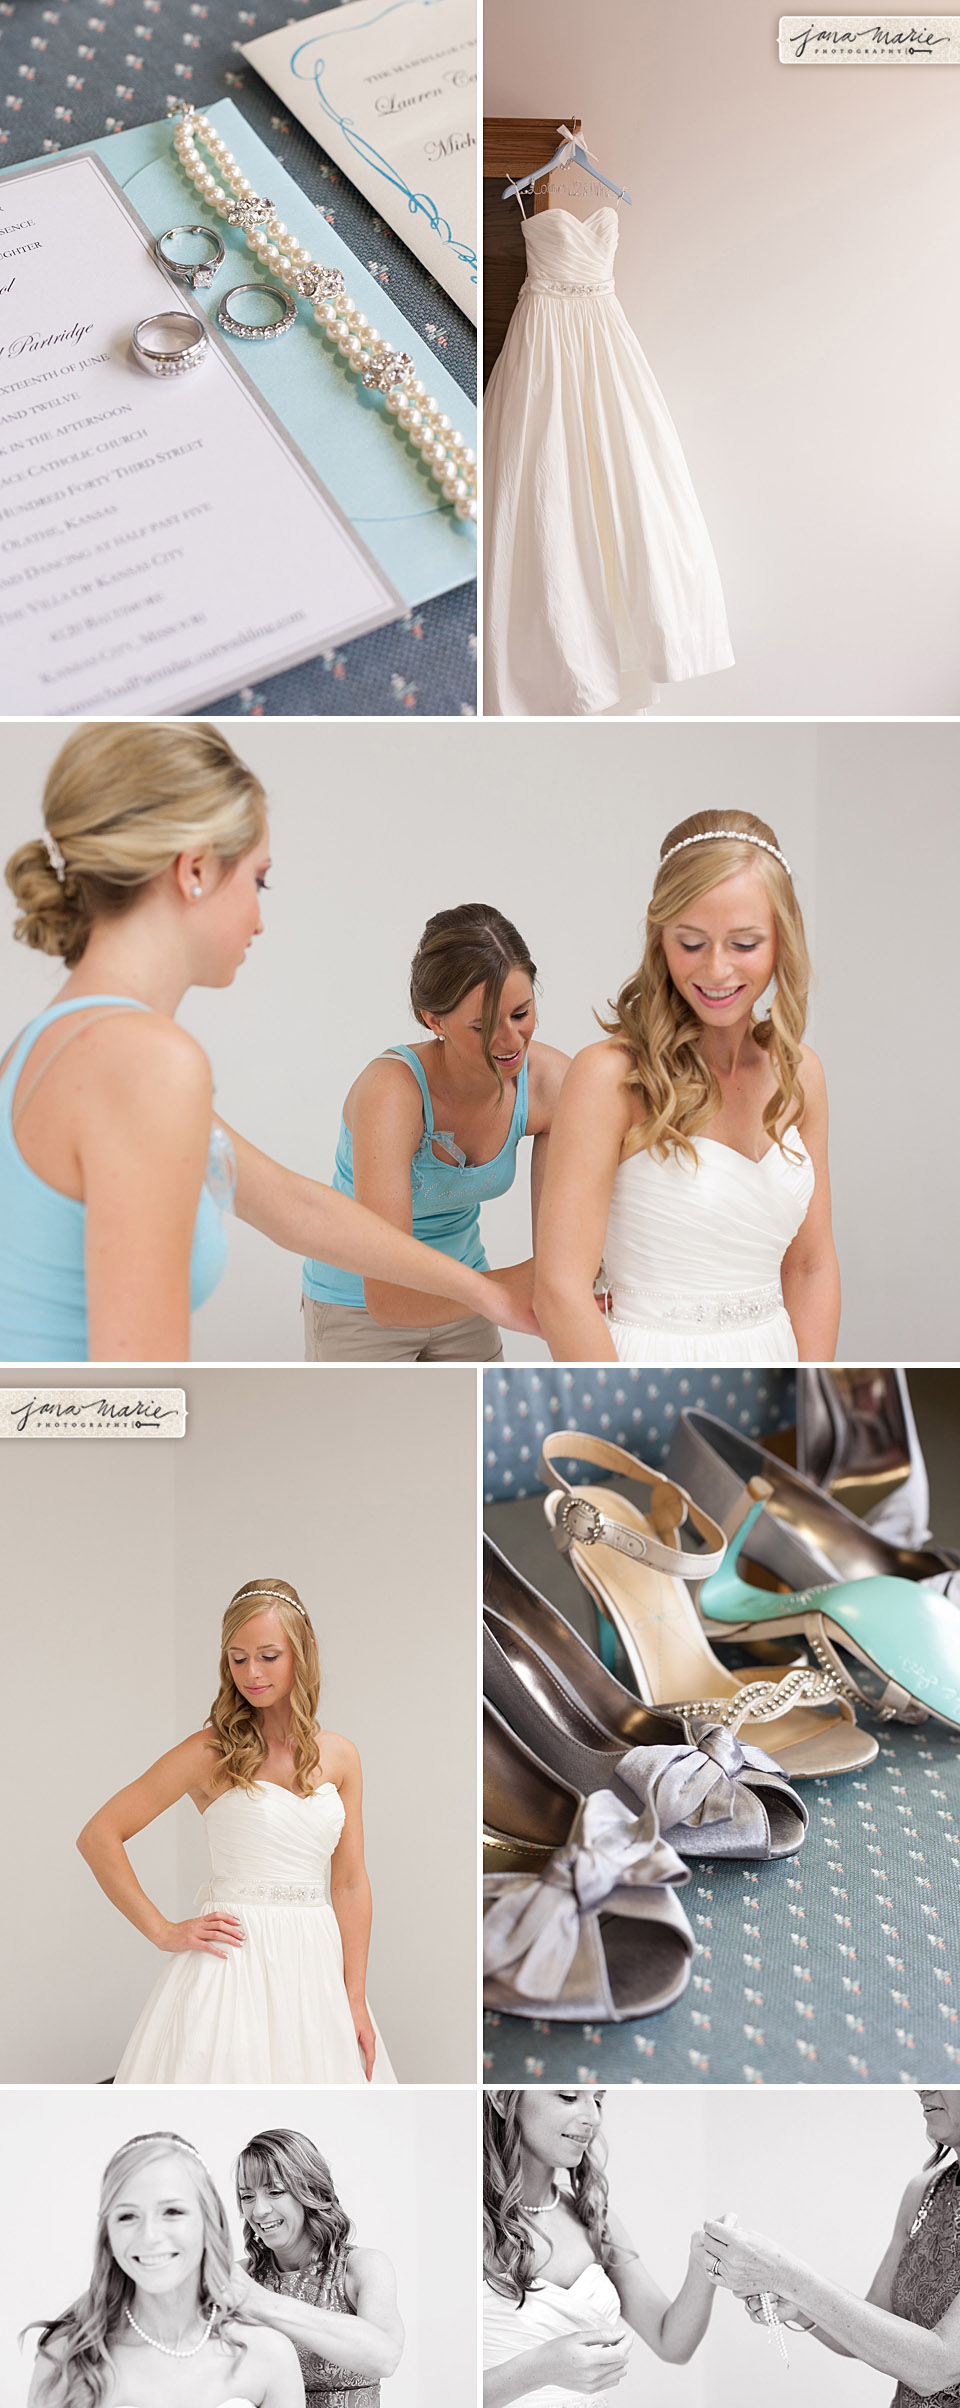 Bridesmaids, getting ready, shoe shots, beautiful high heels, Jana Marie Photos, mom and daughter, Prince of Peace